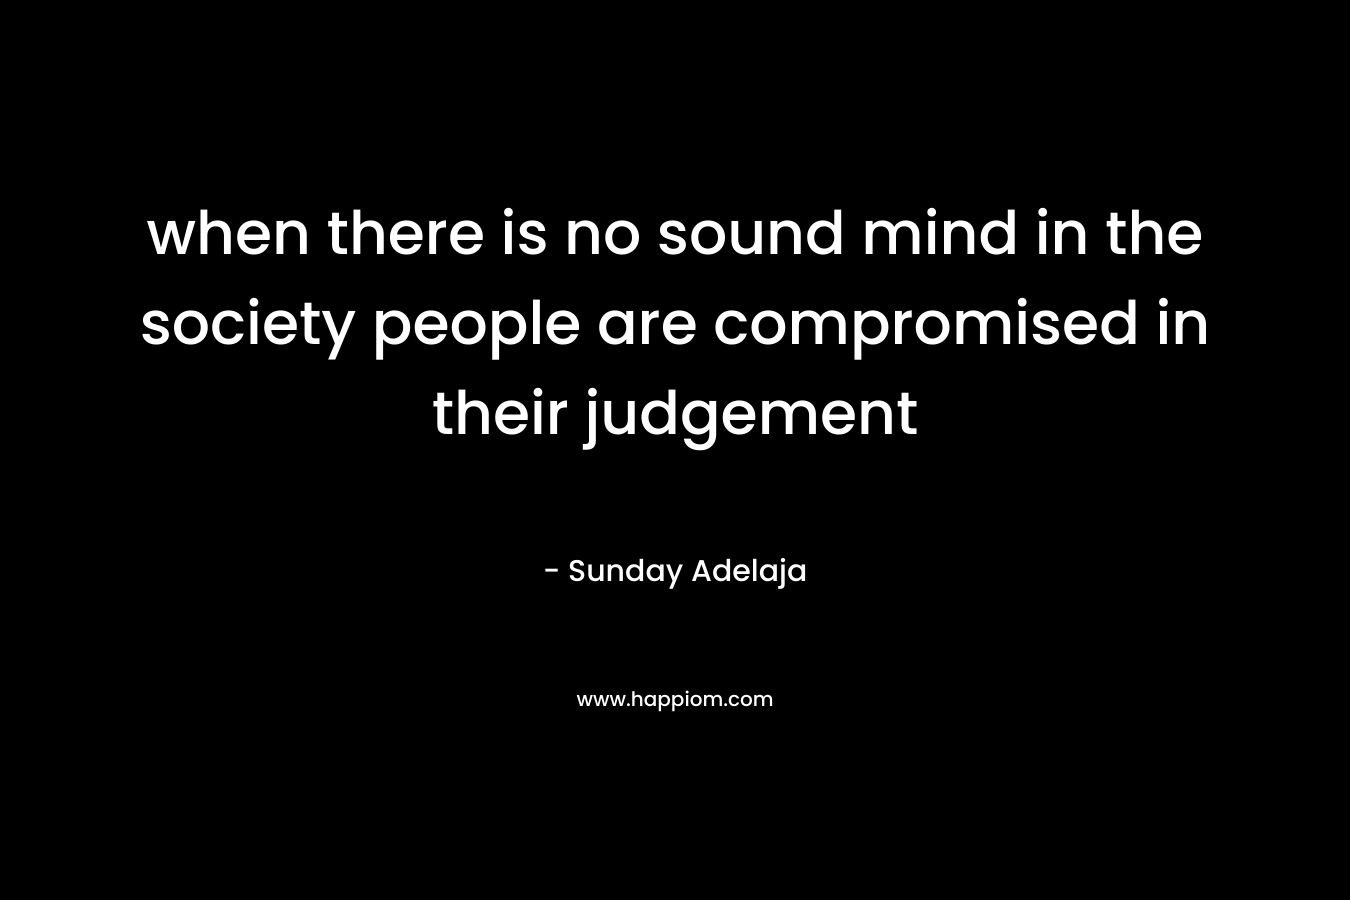 when there is no sound mind in the society people are compromised in their judgement